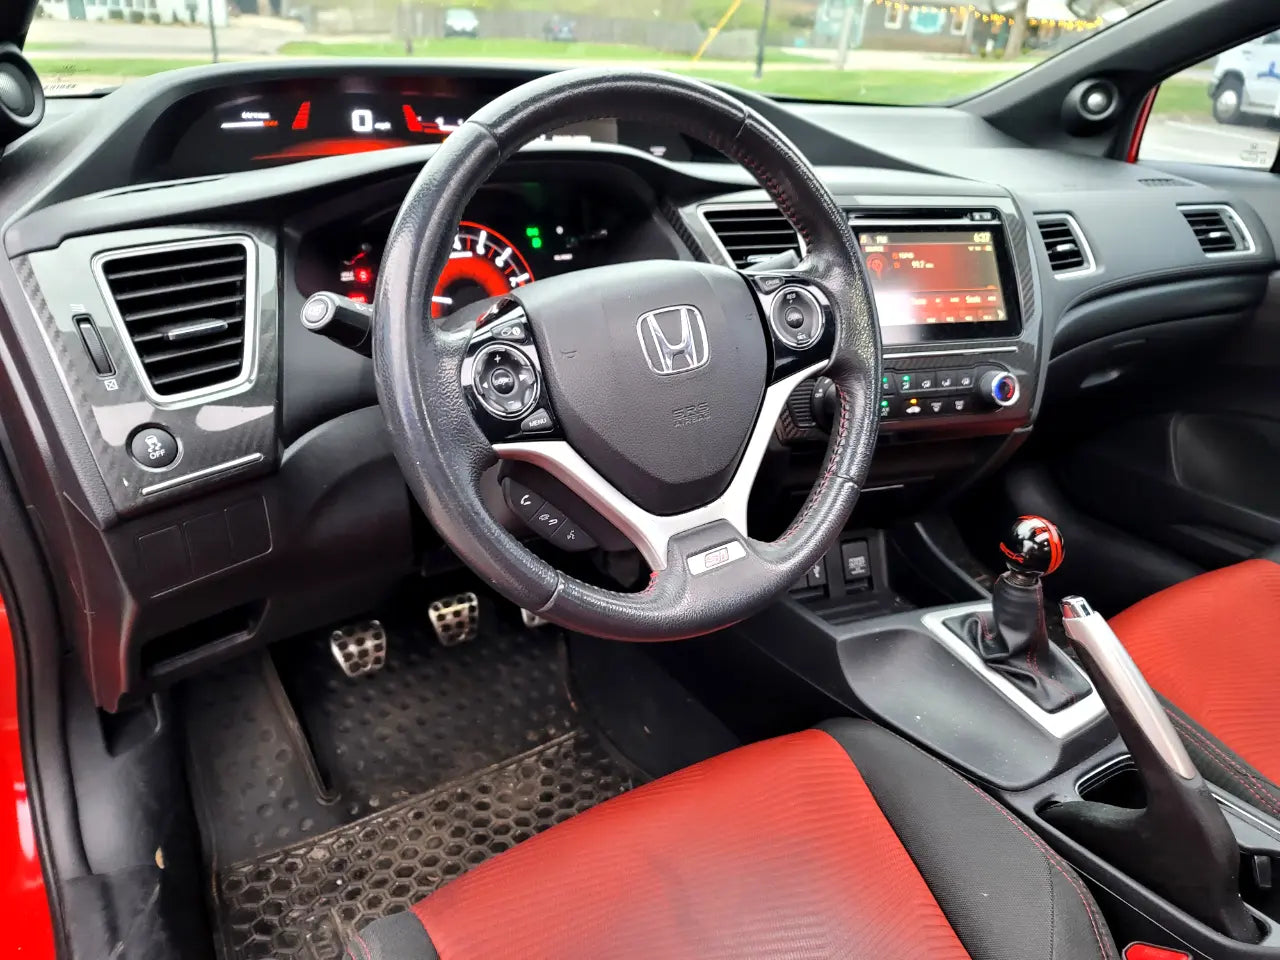 2015 Honda Civic Coupe Si $999 DOWN & DRIVE IN 1 HOUR!